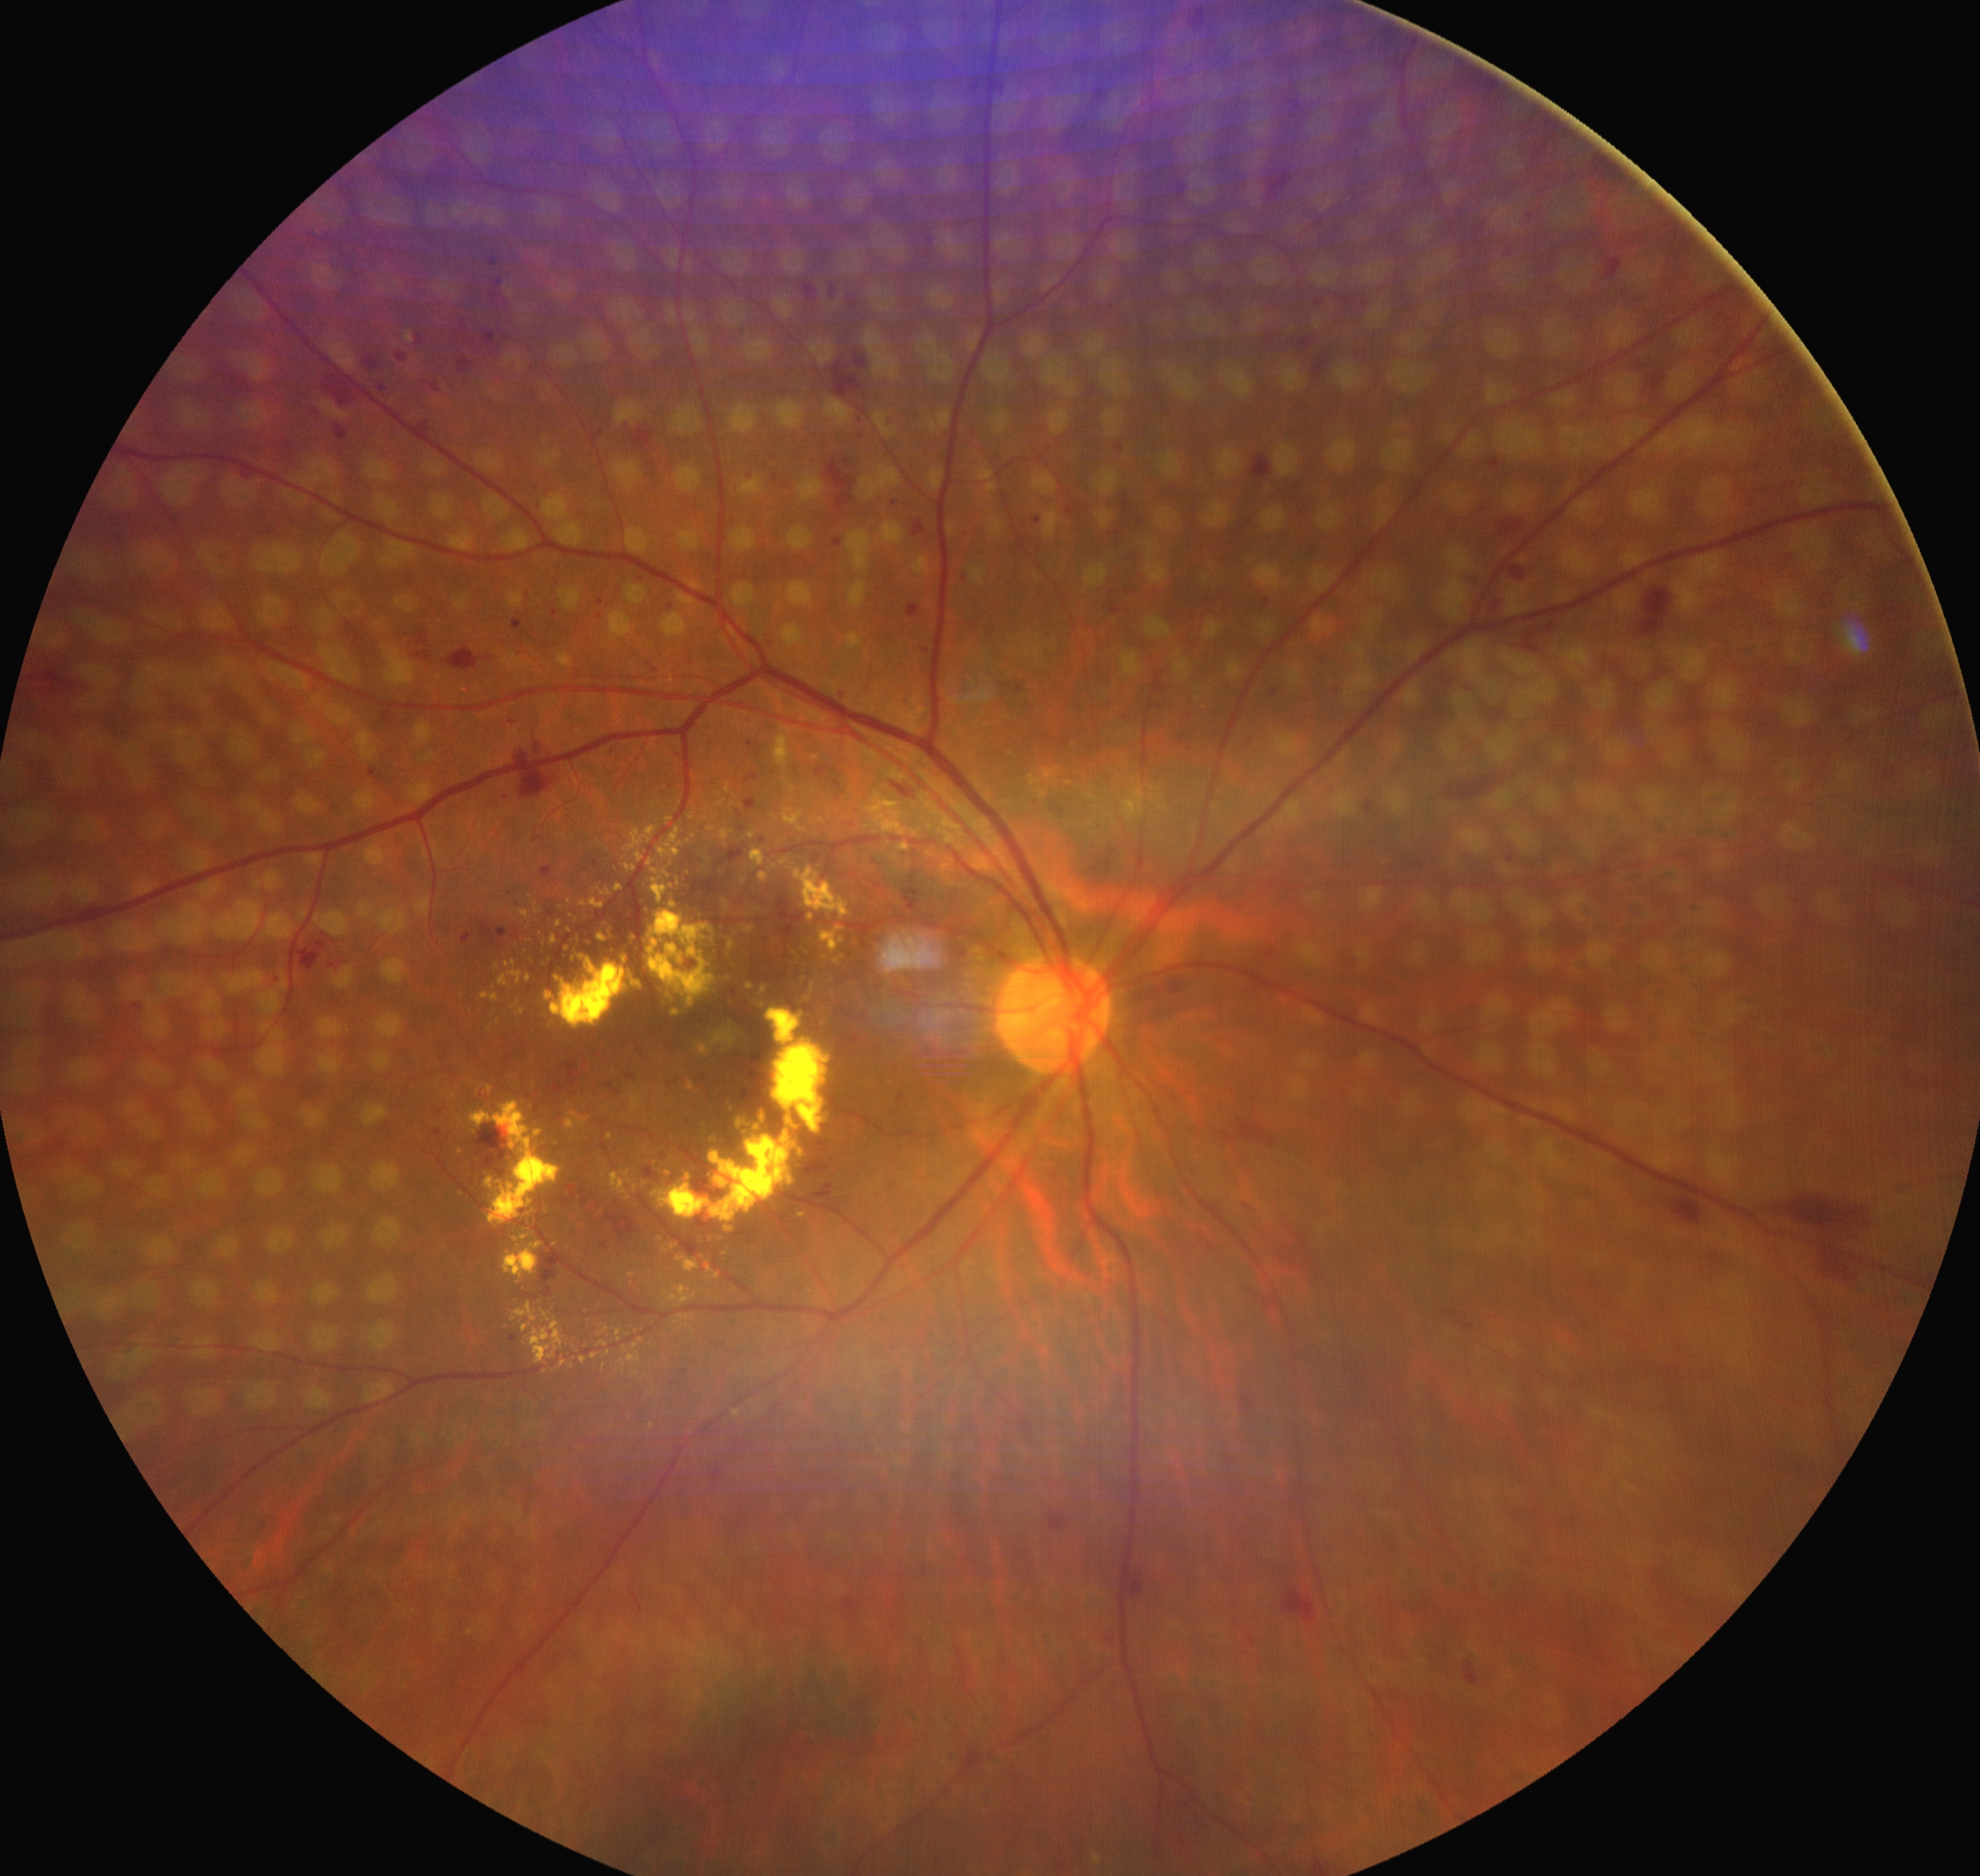 <p>Regressed Neovascularization of the Disc and Neovascularization Elsewhere in an Eye With Proliferative Diabetic Retinopathy